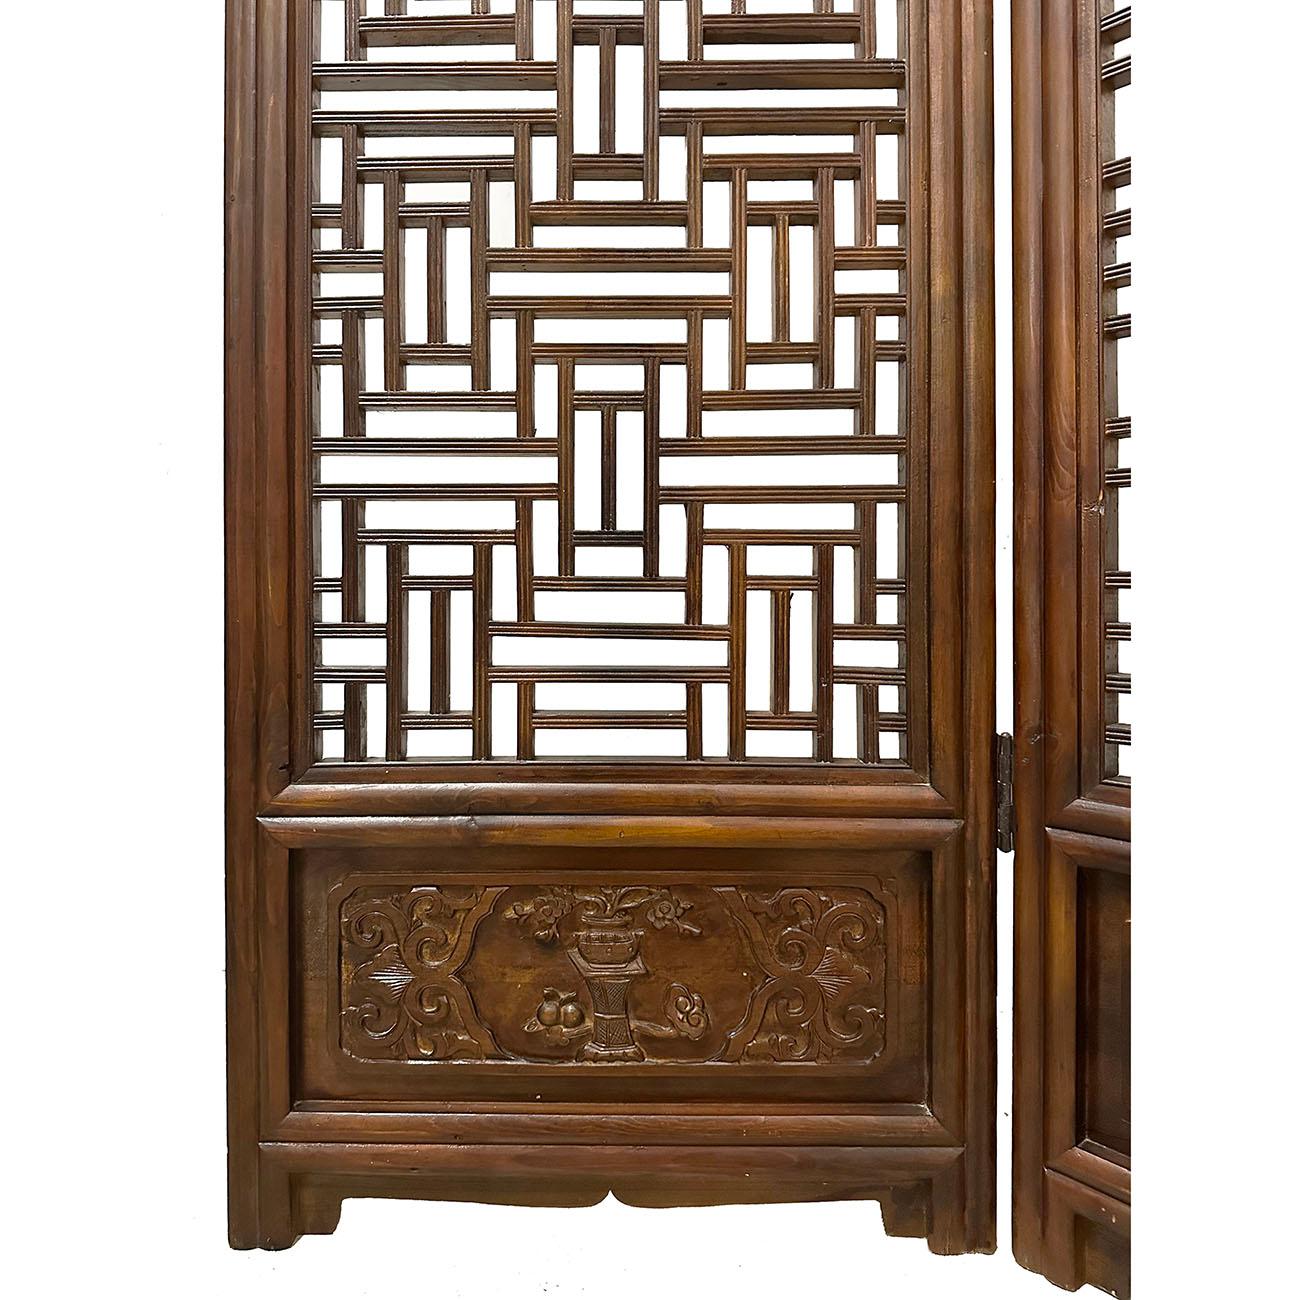 20th Century Antique Chinese Hand Carved 4 Panels Wooden Screen/Room Divider In Good Condition For Sale In Pomona, CA